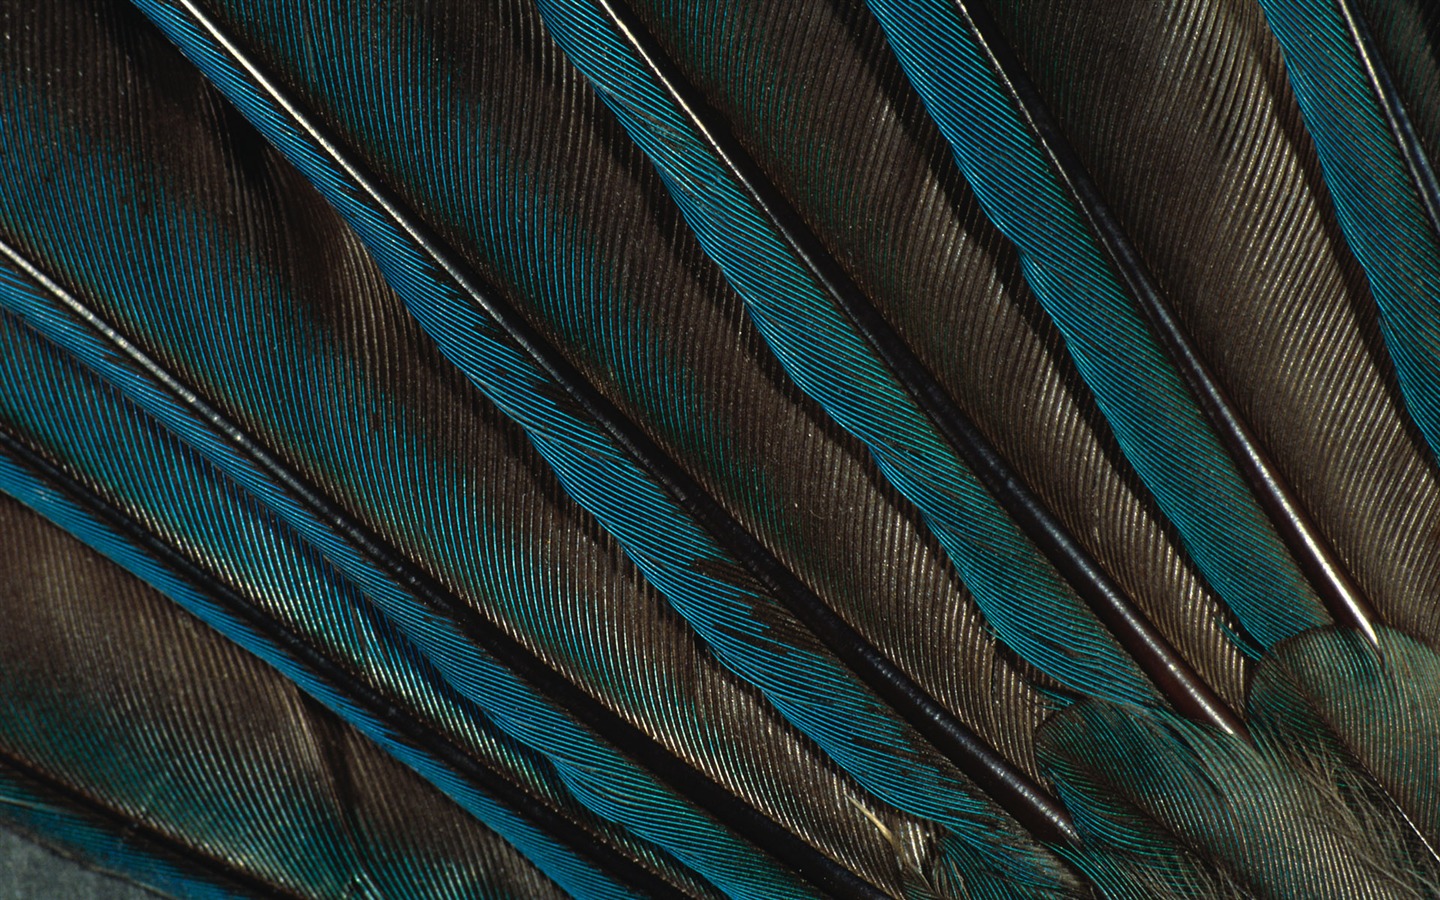 Colorful feather wings close-up wallpaper (2) #14 - 1440x900